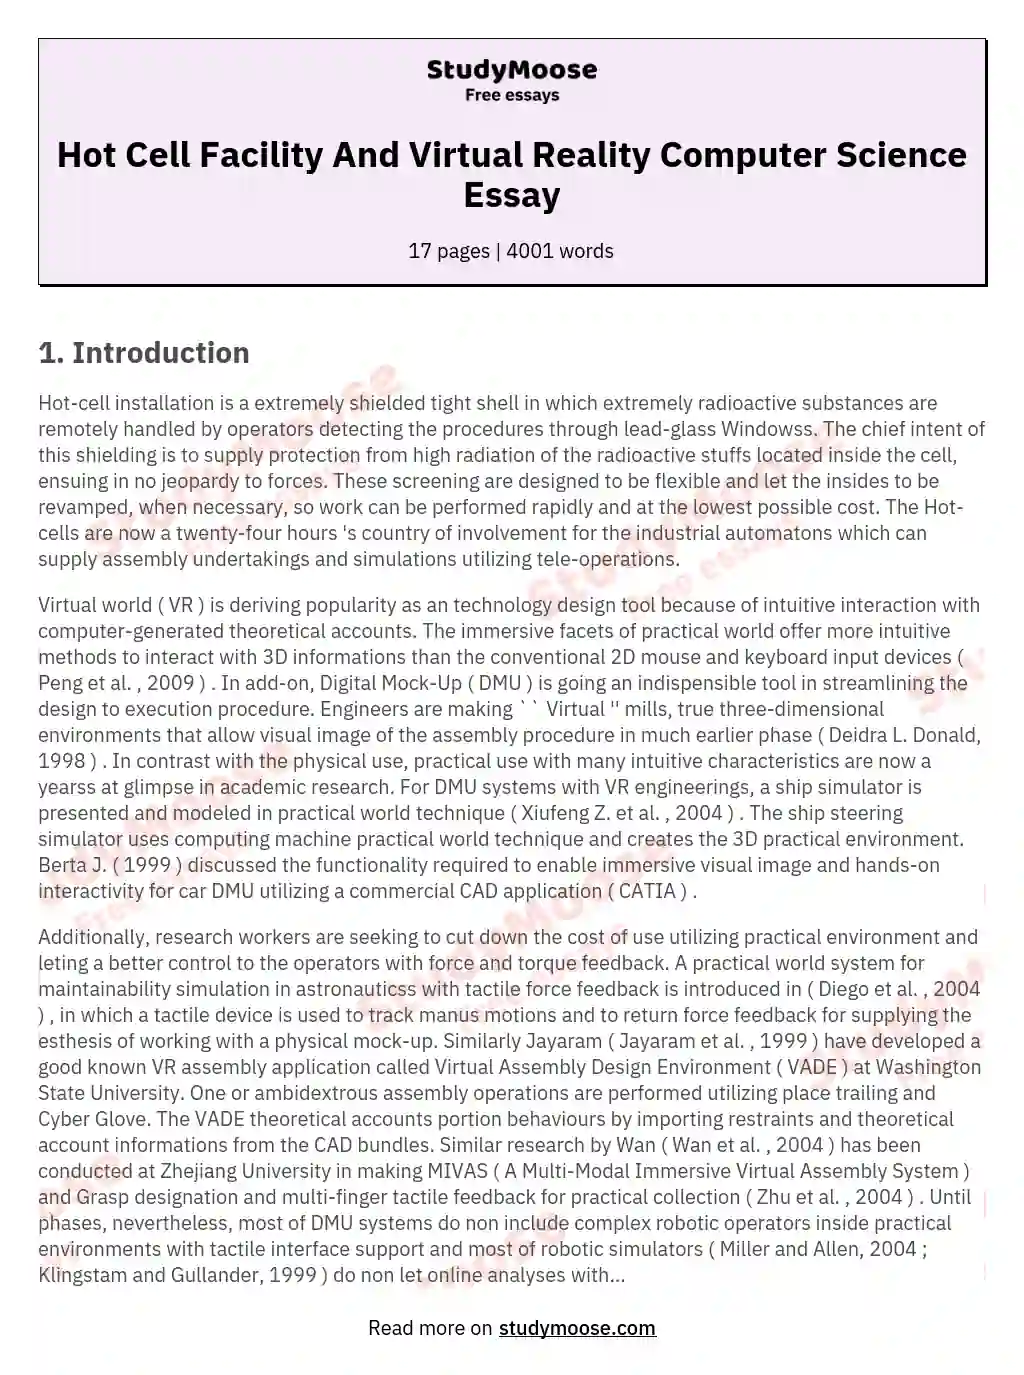 Hot Cell Facility And Virtual Reality Computer Science Essay essay